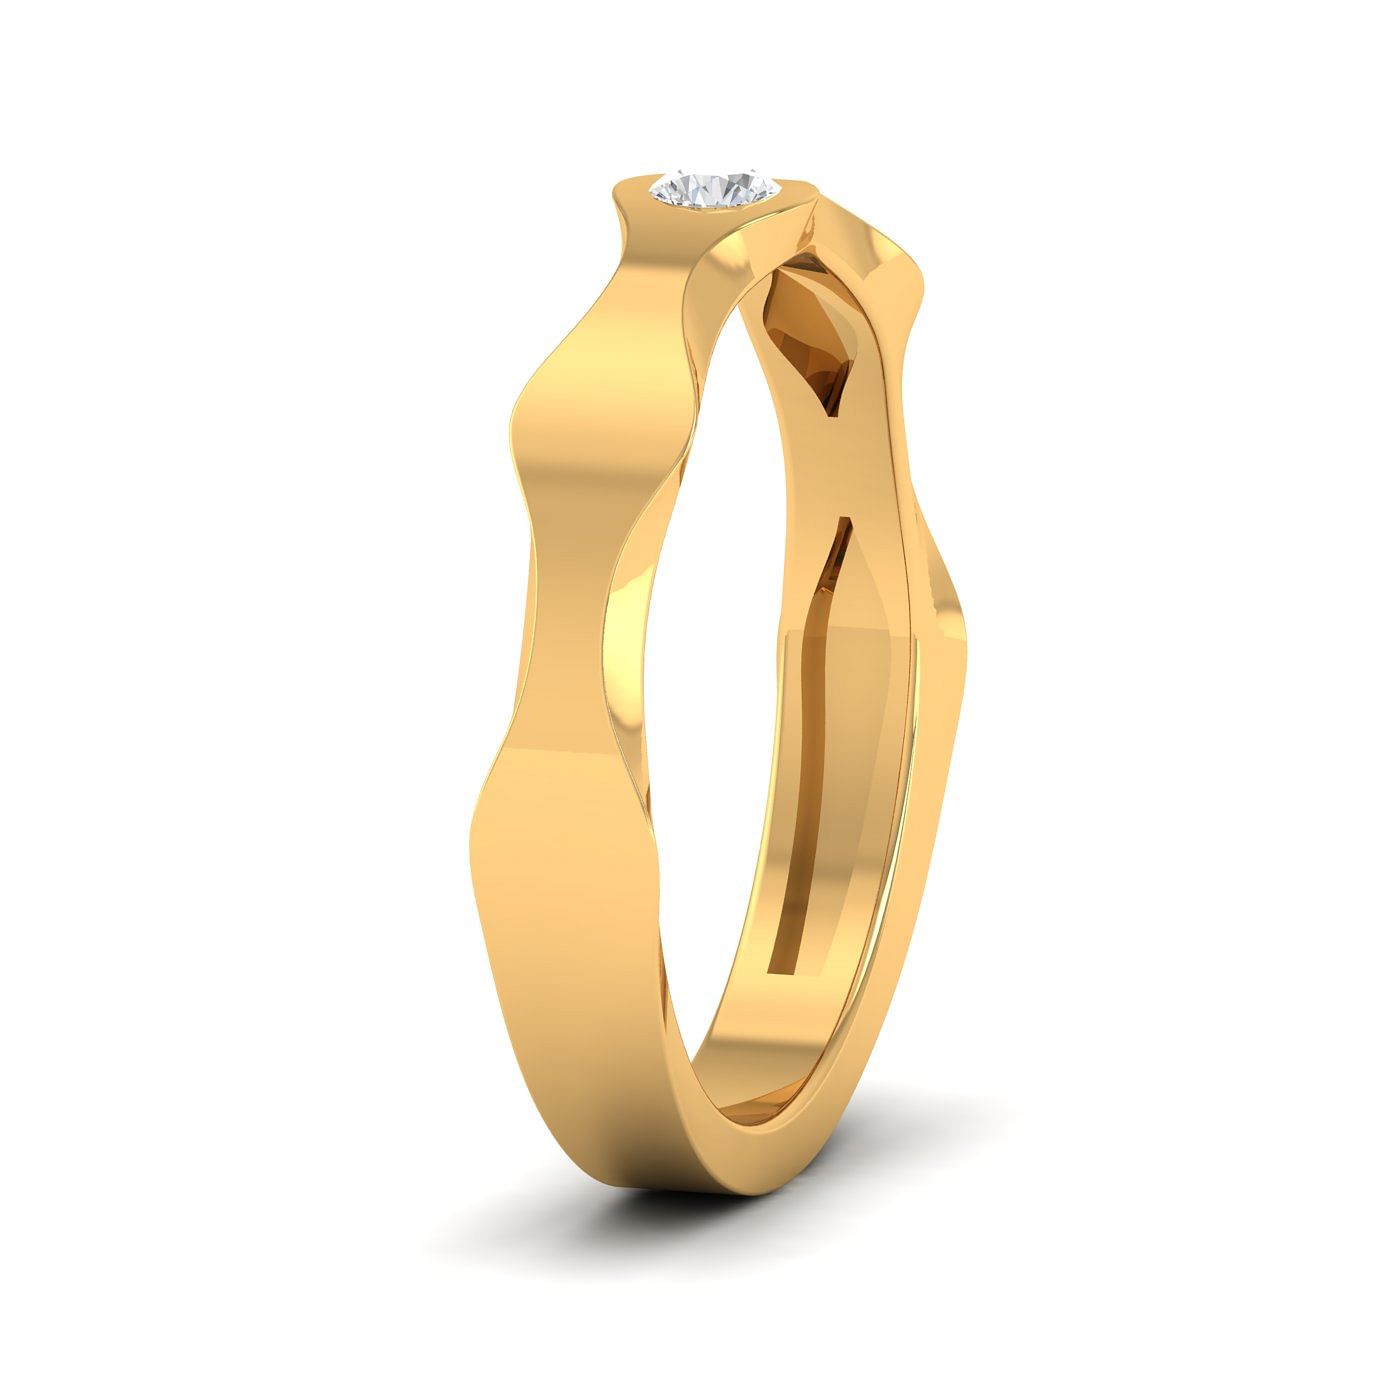 Design Your Own Wedding Rings – Whatsapp Us Now! |